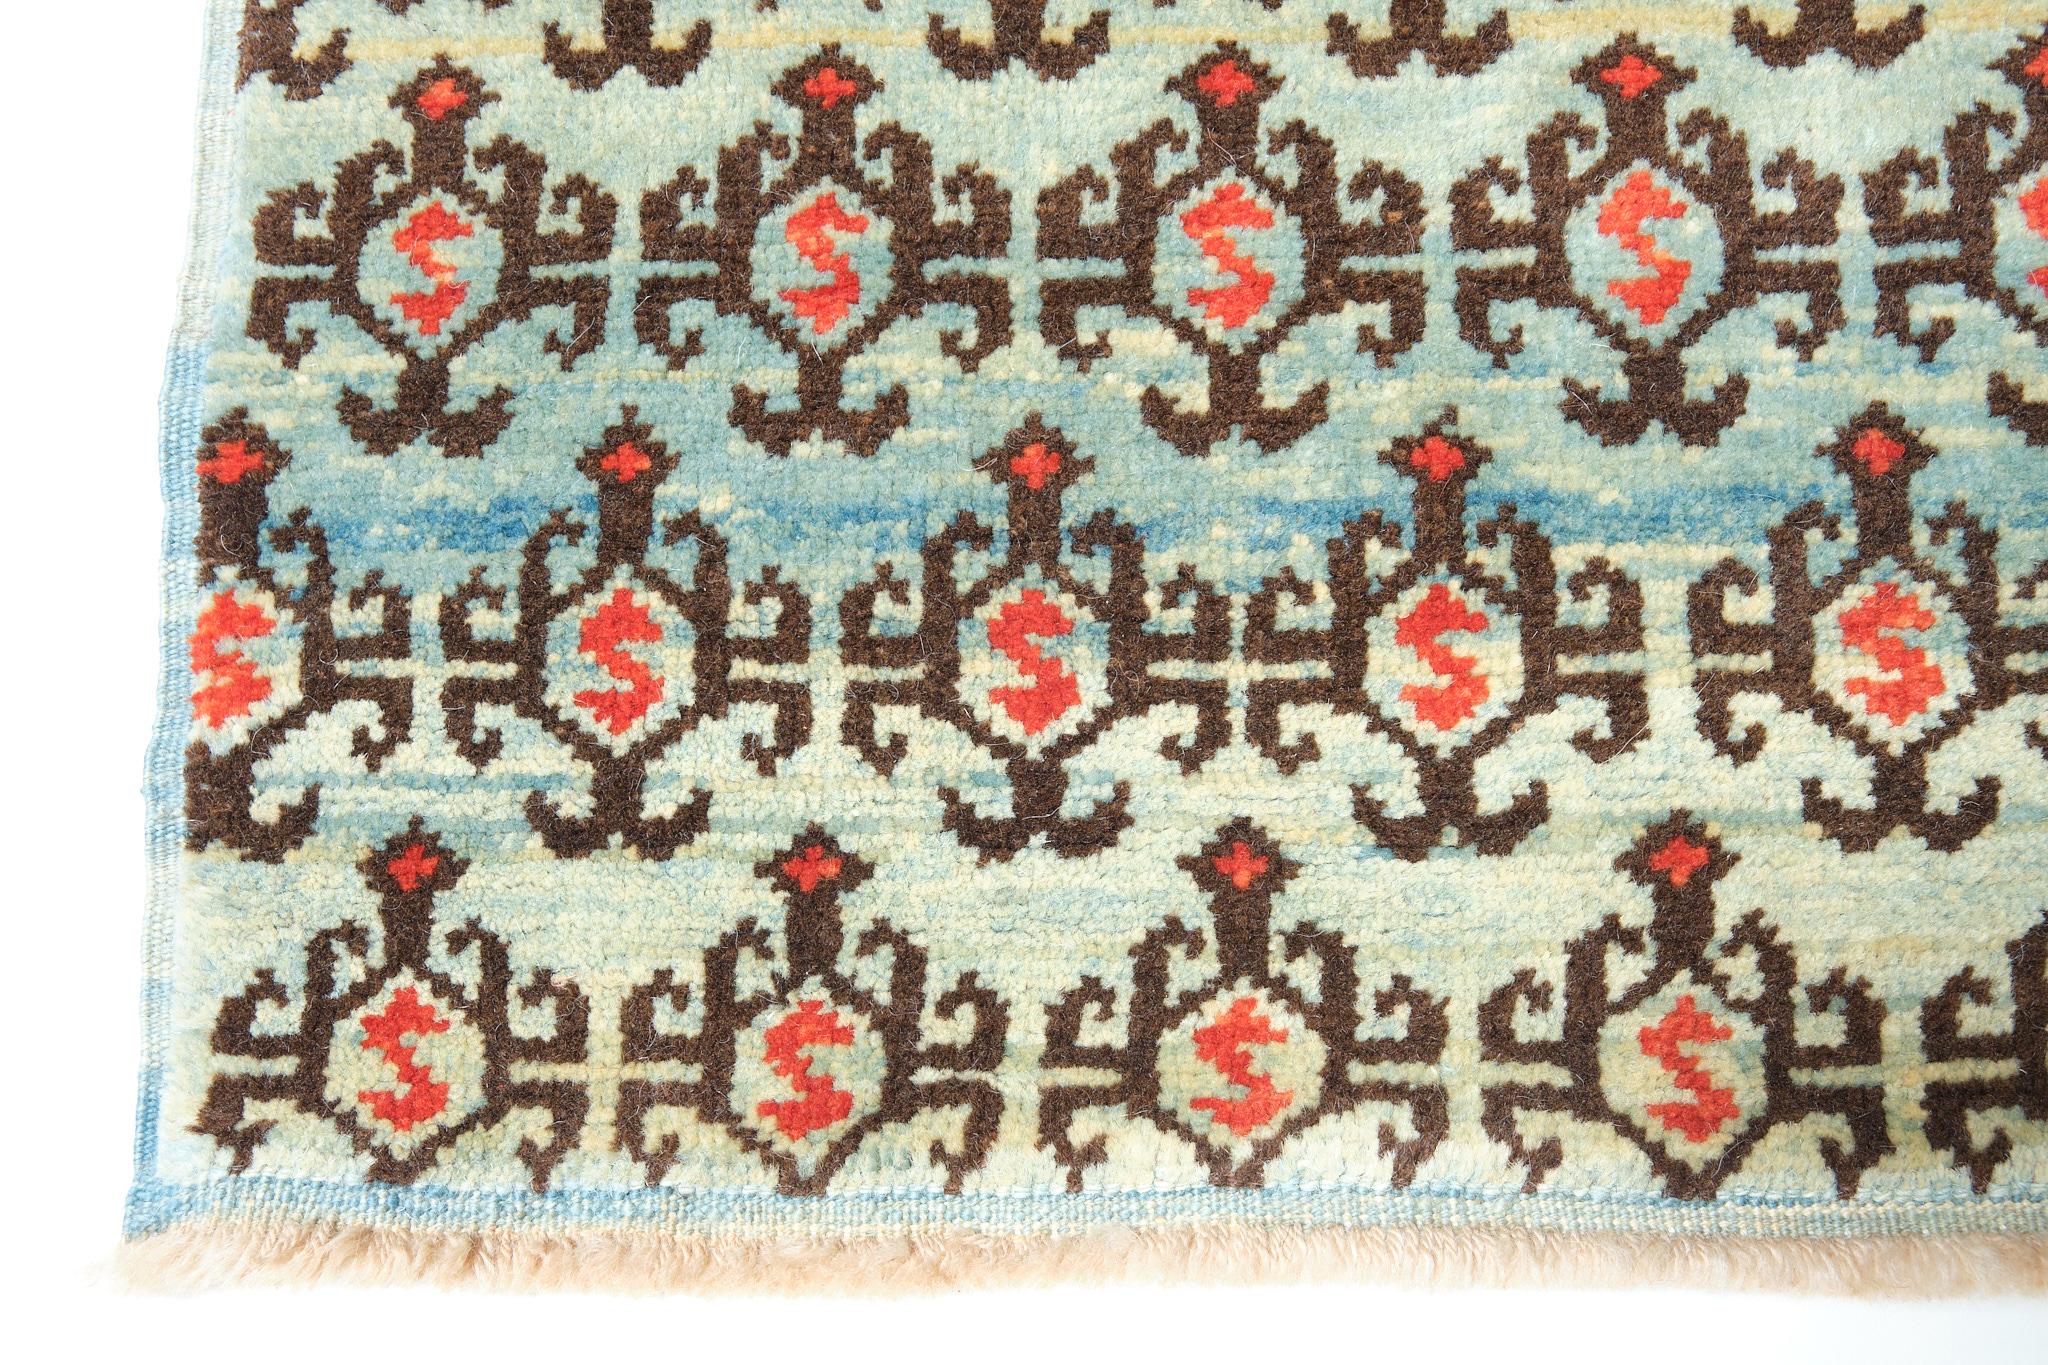 The source of the carpet comes from the book Orient Stars Collection, Anatolian Tribal Rugs 1050-1750, Michael Franses, Hali Publications Ltd, 2021 fig.27. This 13th-century carpet is from probably the Konya region, central Anatolia, circa 1200-1300